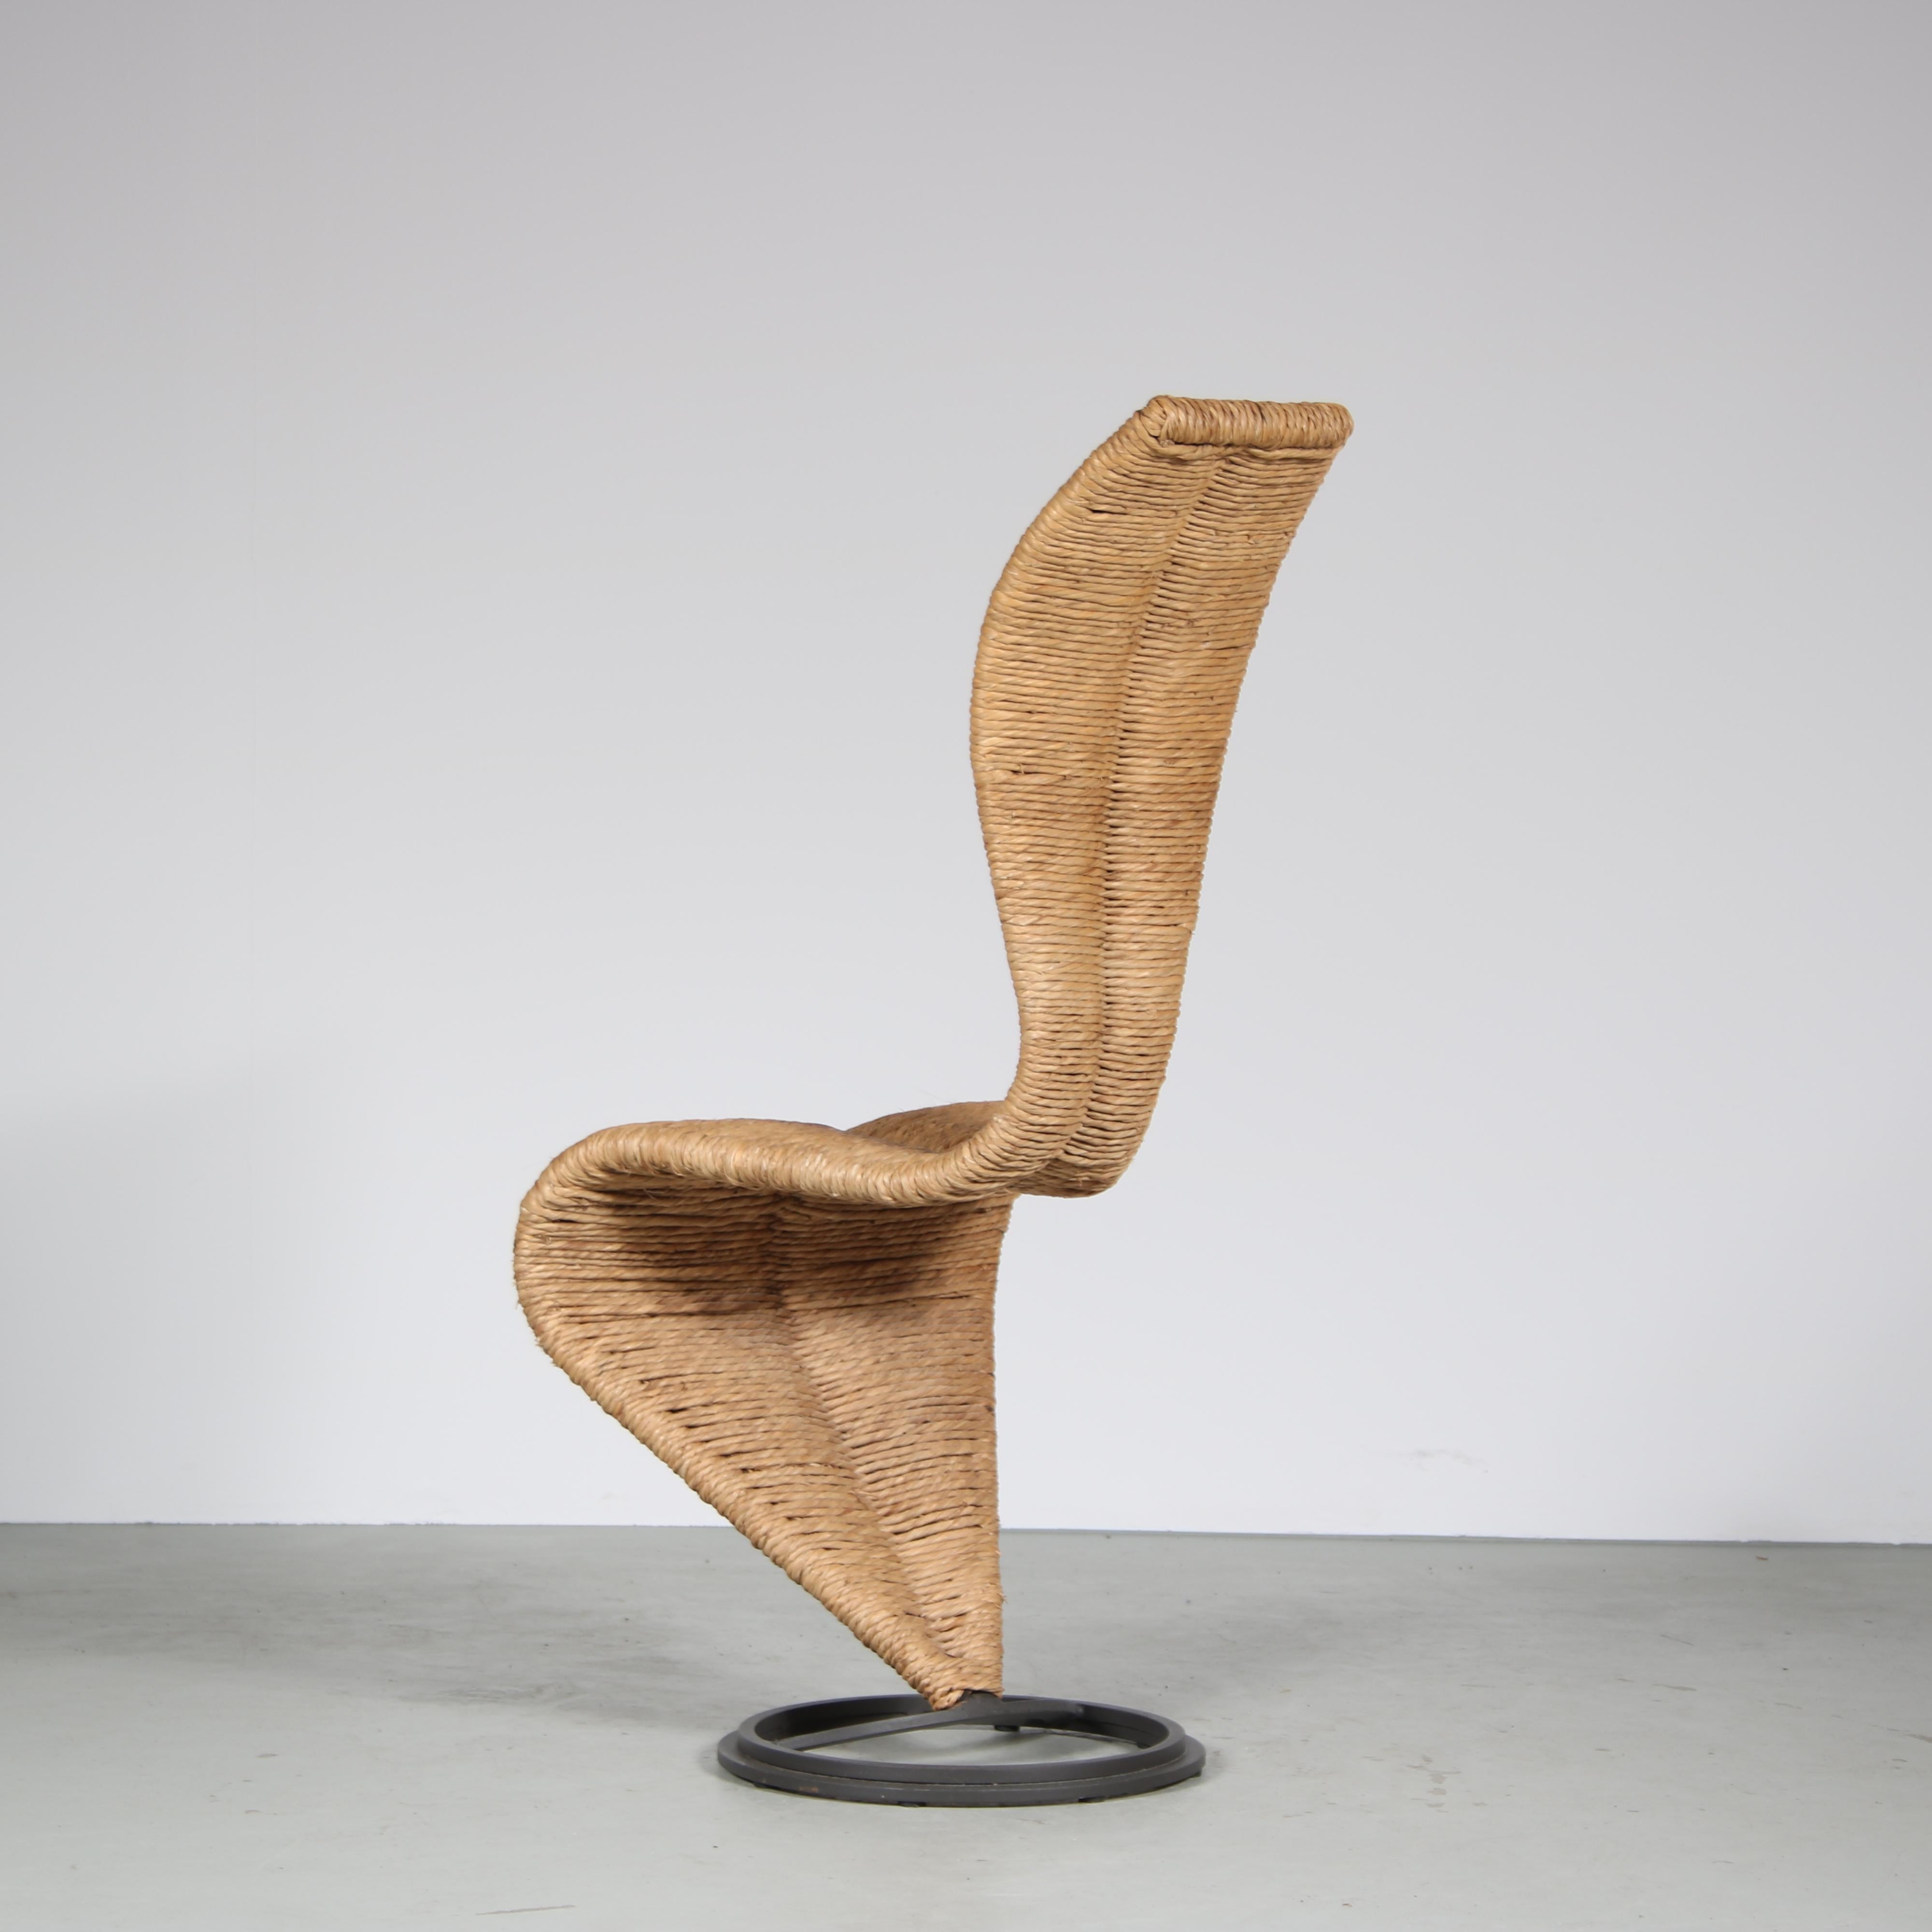 Late 20th Century “S Chair” by Tom Dixon for Cappelini, Italy, 1980